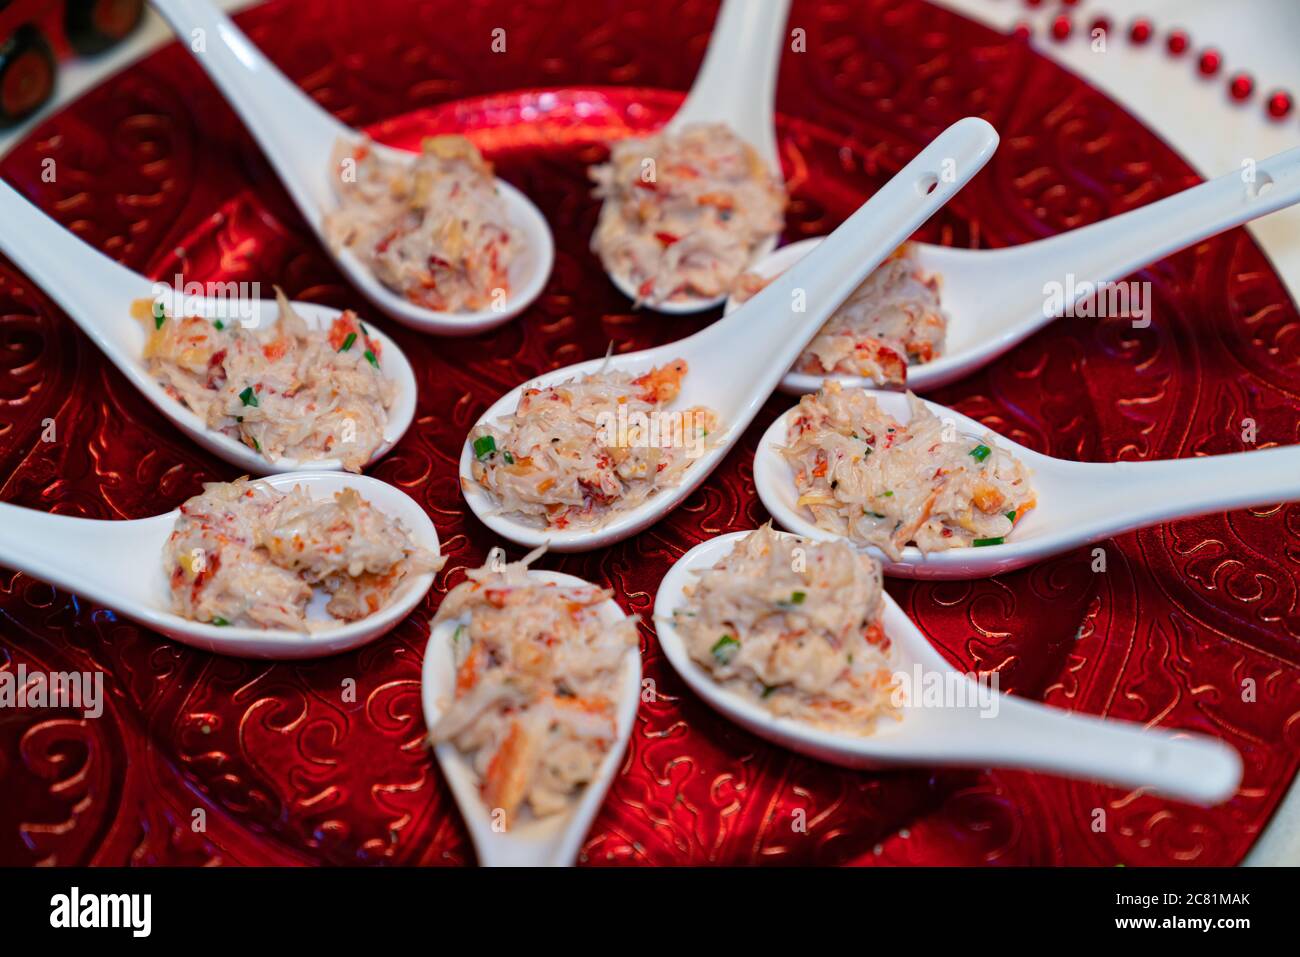 King crab appetizers served in slab spoons, at a celebration or dinner. Stock Photo